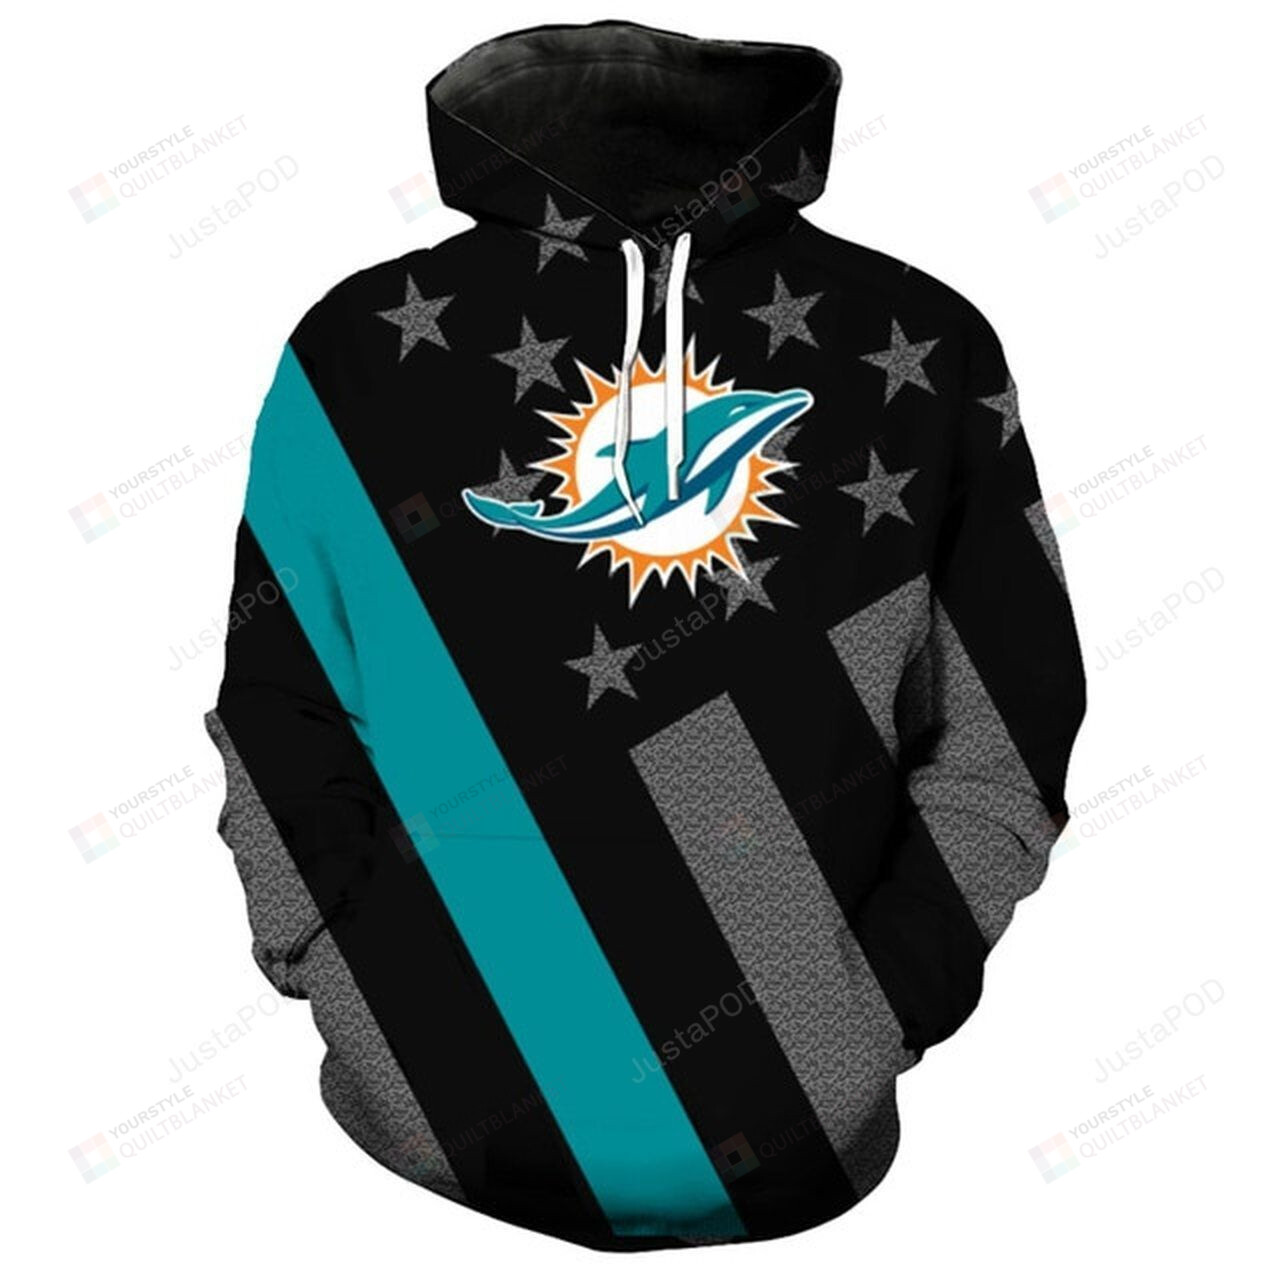 Miami Dolphins Shop - NFL Miami Dolphins Patriotic Men and Women 3D Hoodie Zip Hoodie NFL Miami Dolphins 3D Shirt